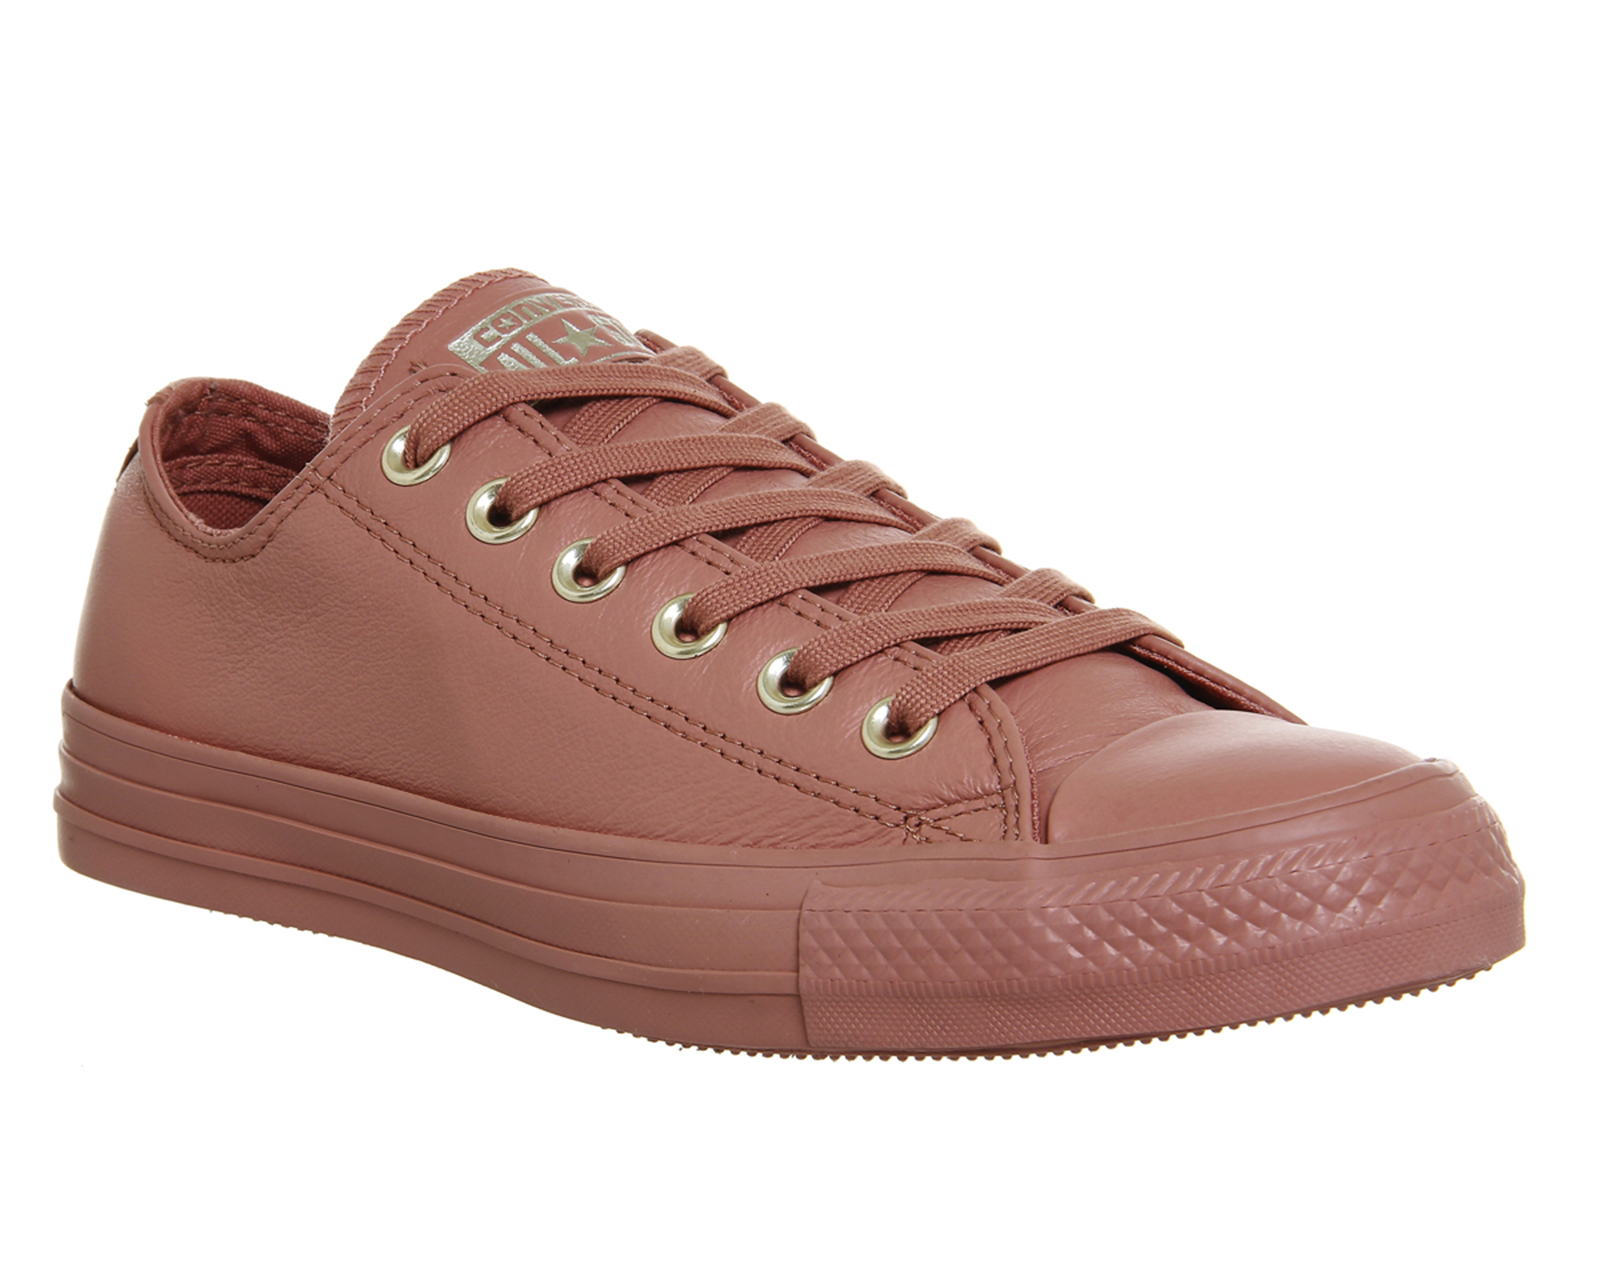 Converse All Star Low Leather Desert Sand Light Gold - Hers trainers